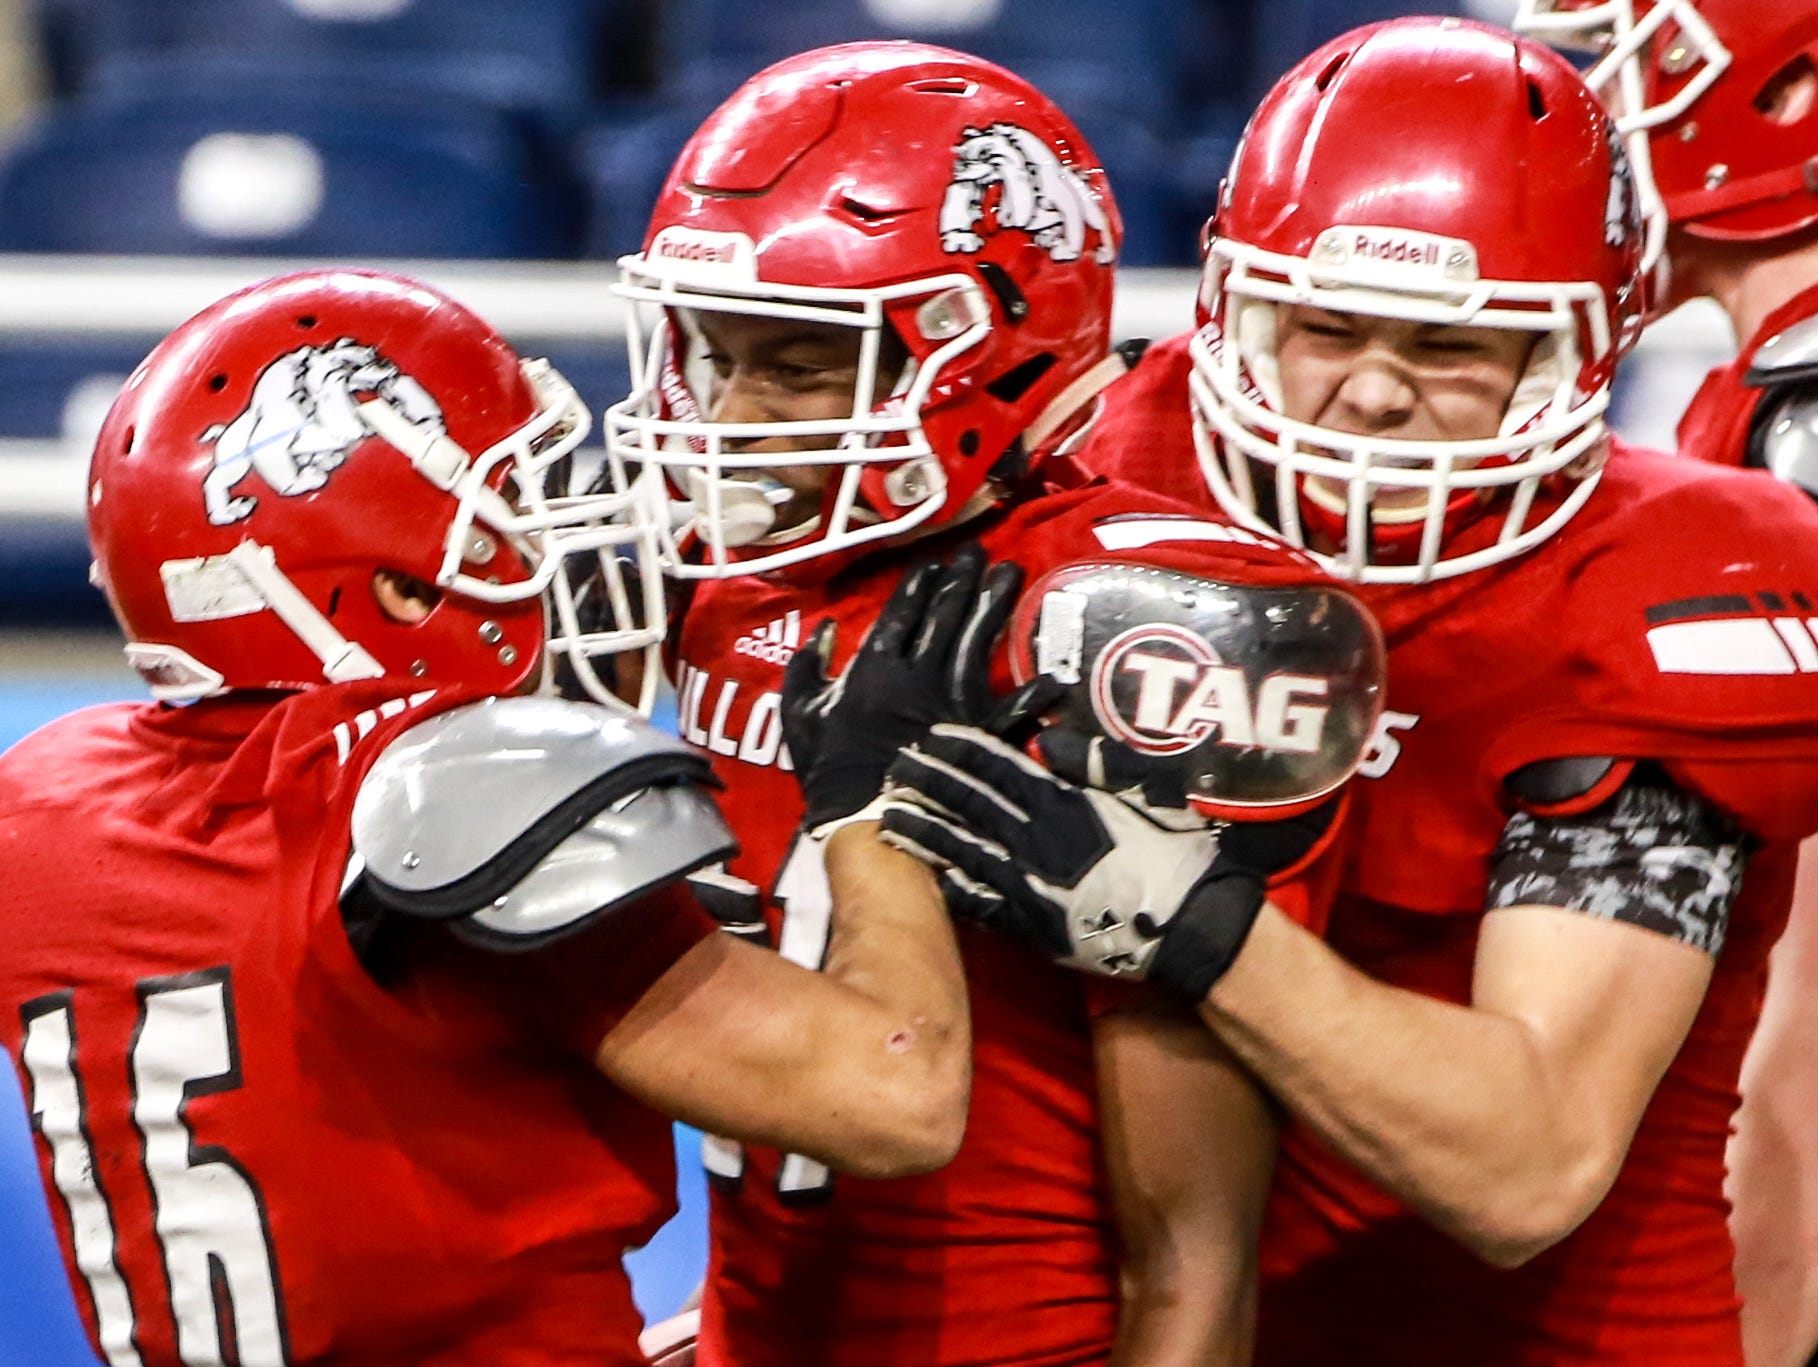 Romeo WR Bradley Tanner, center, celebrates scoring a touchdown with his teammates, Hunberto Flores and Louis Thom, during the first half Michigan High School Athletic Association football Division 1 finals against Detroit Cass Tech at Ford Field in Detroit on Saturday, Nov. 28, 2015.